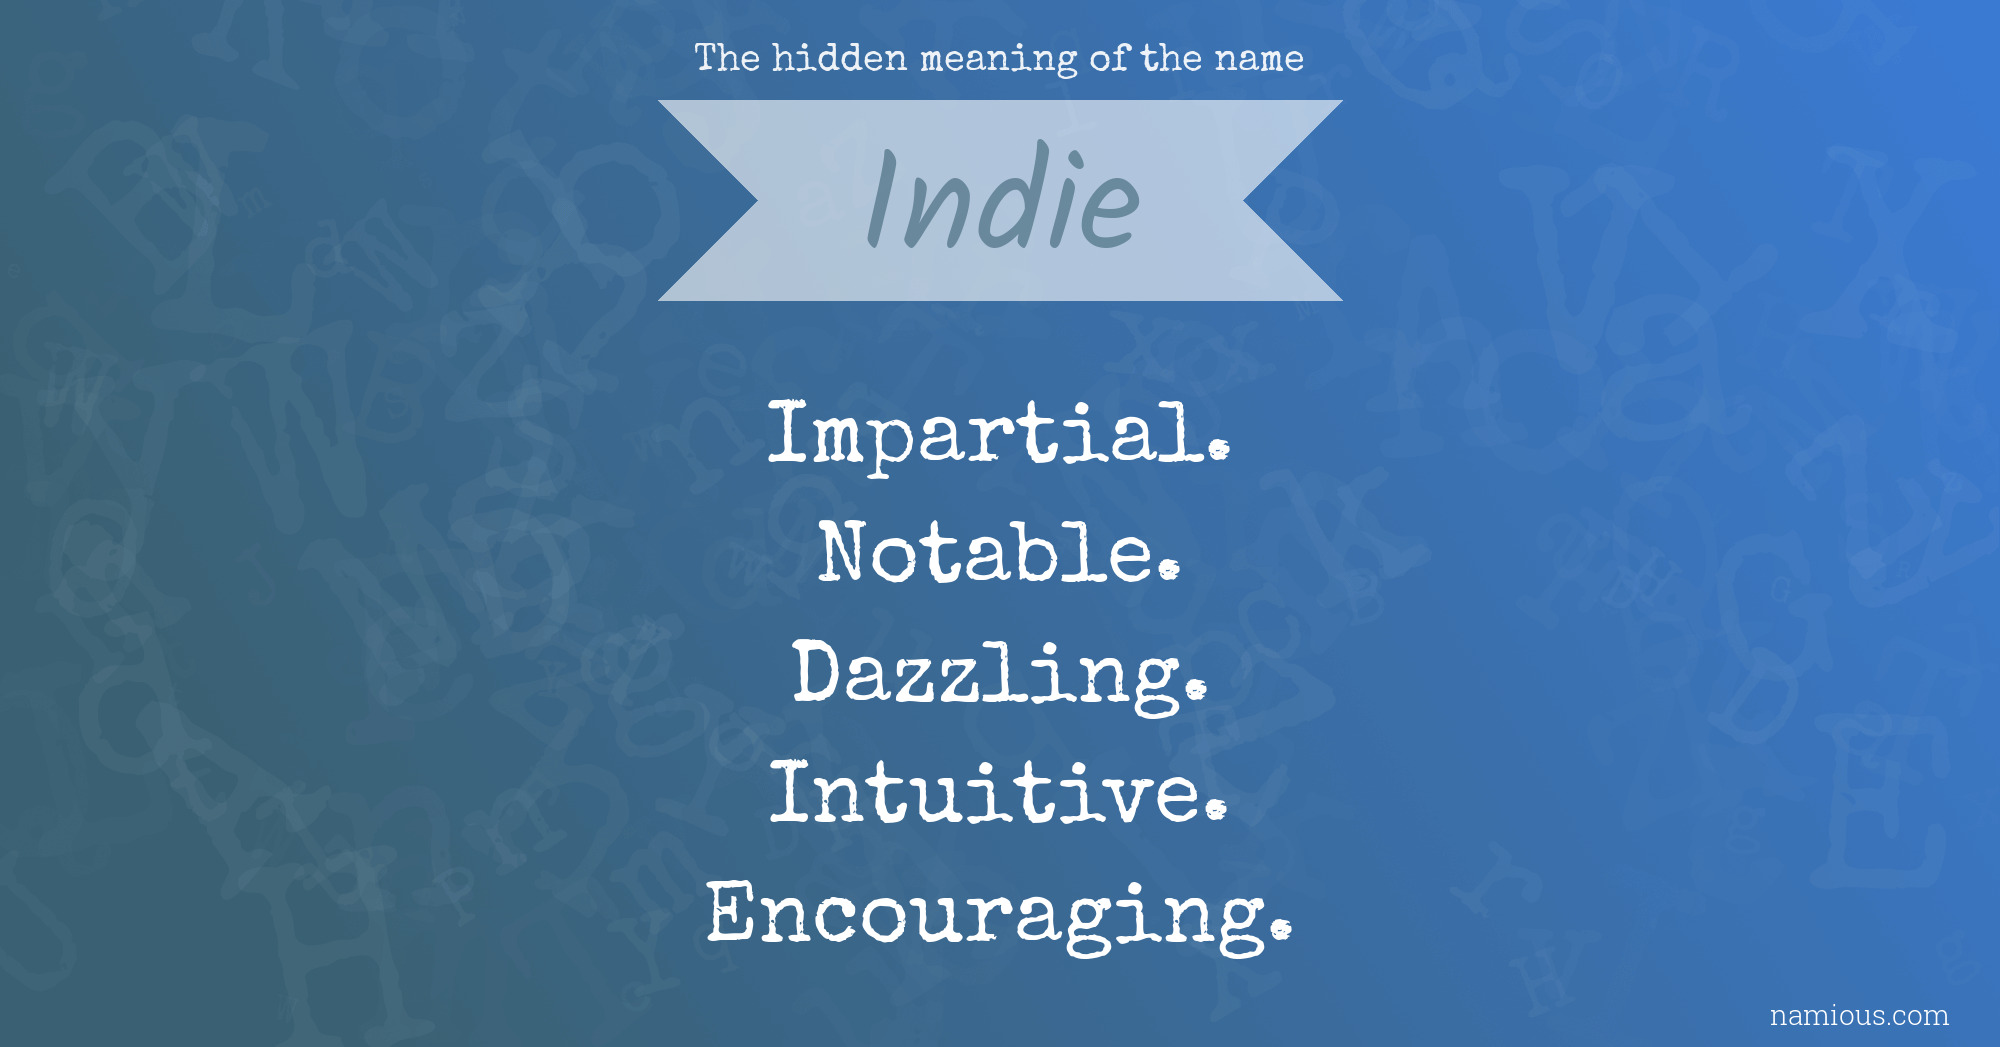 The hidden meaning of the name Indie